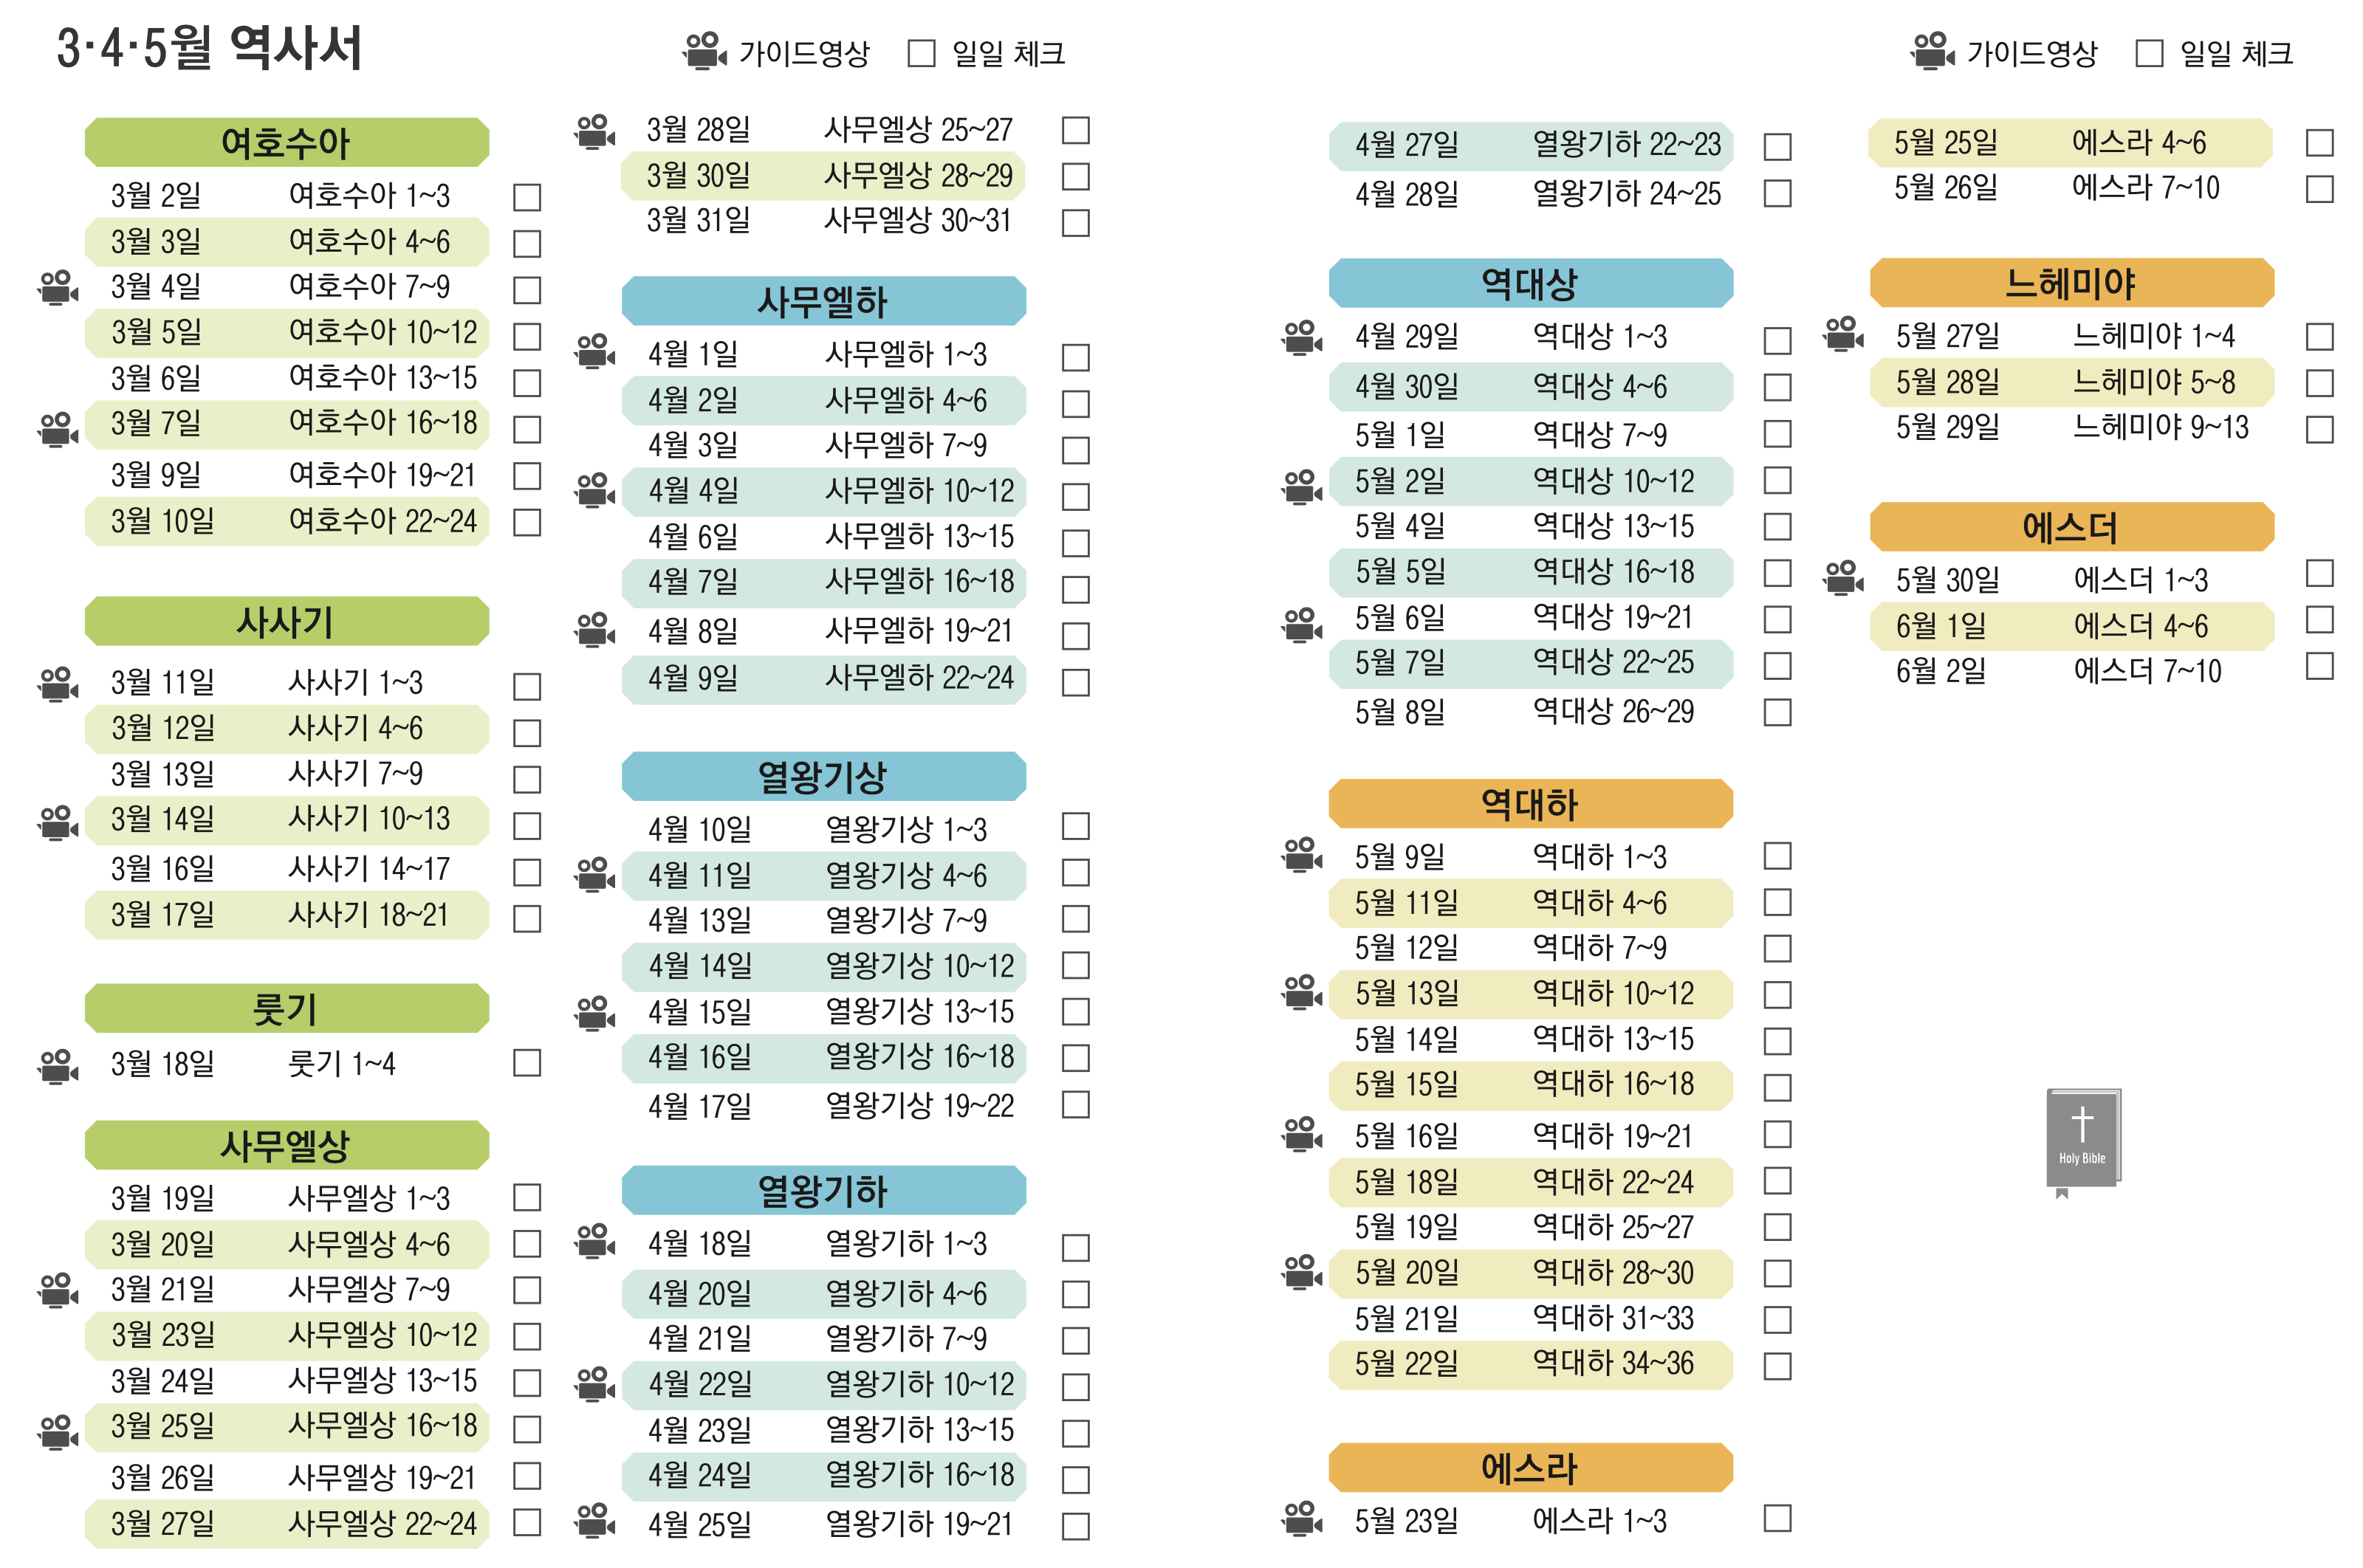 2020-mar-apr-may-bible-schedule.png